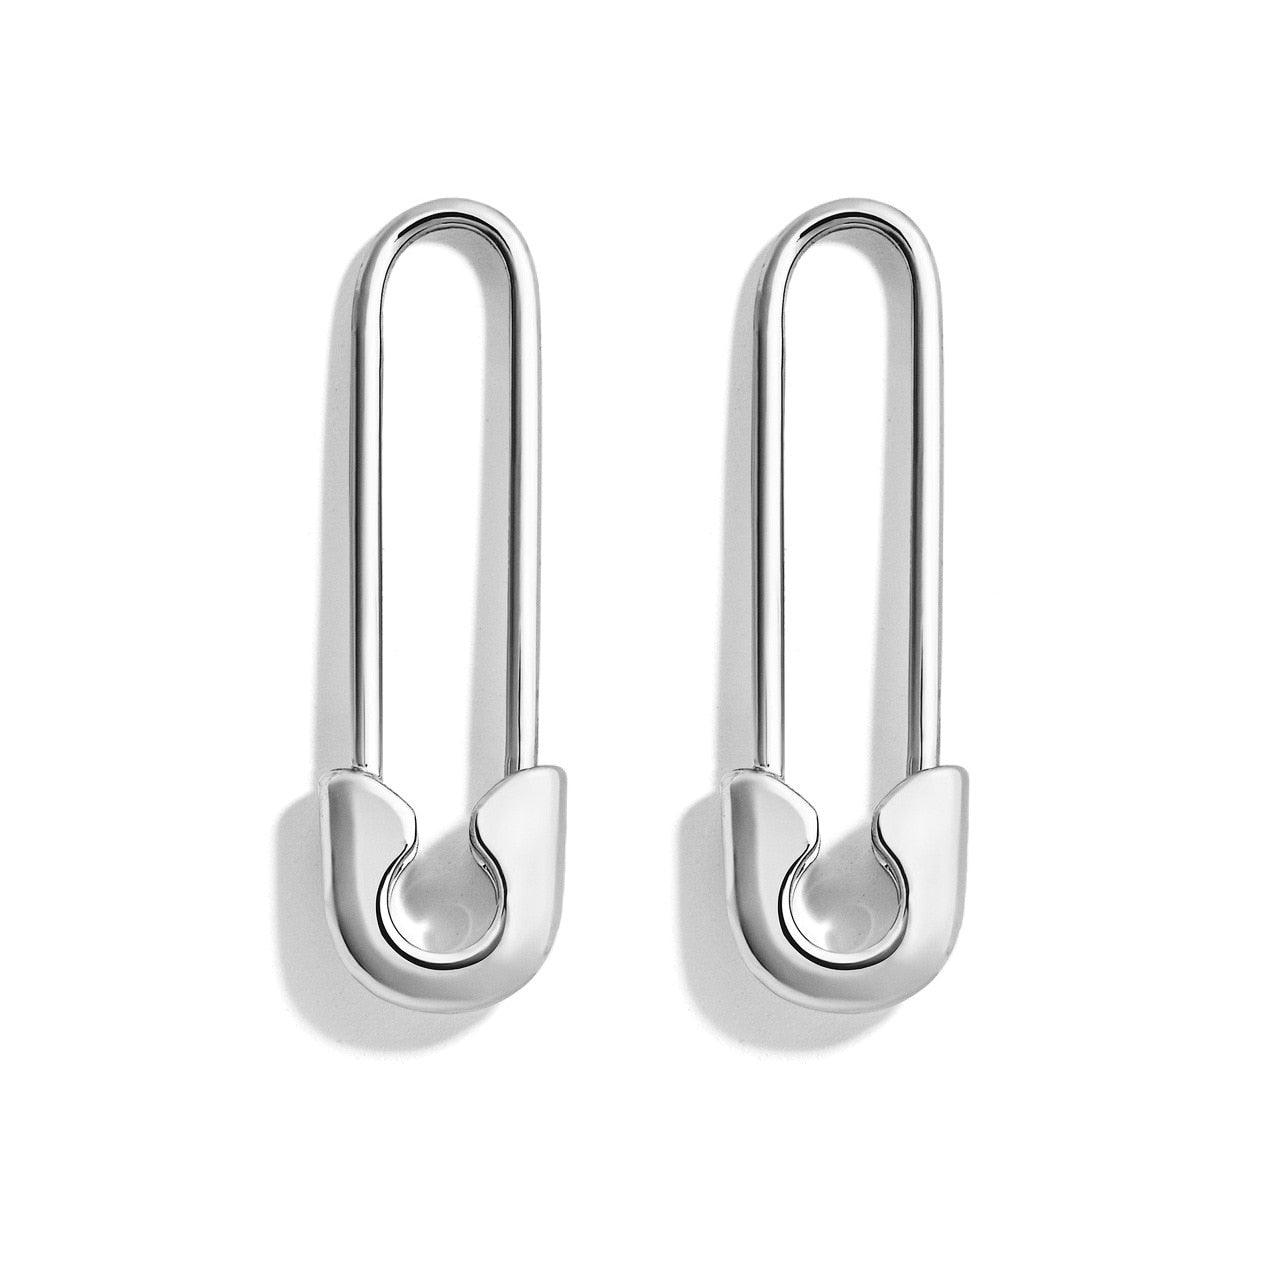 Safety Pin Earrings - ODDSALTBoutique